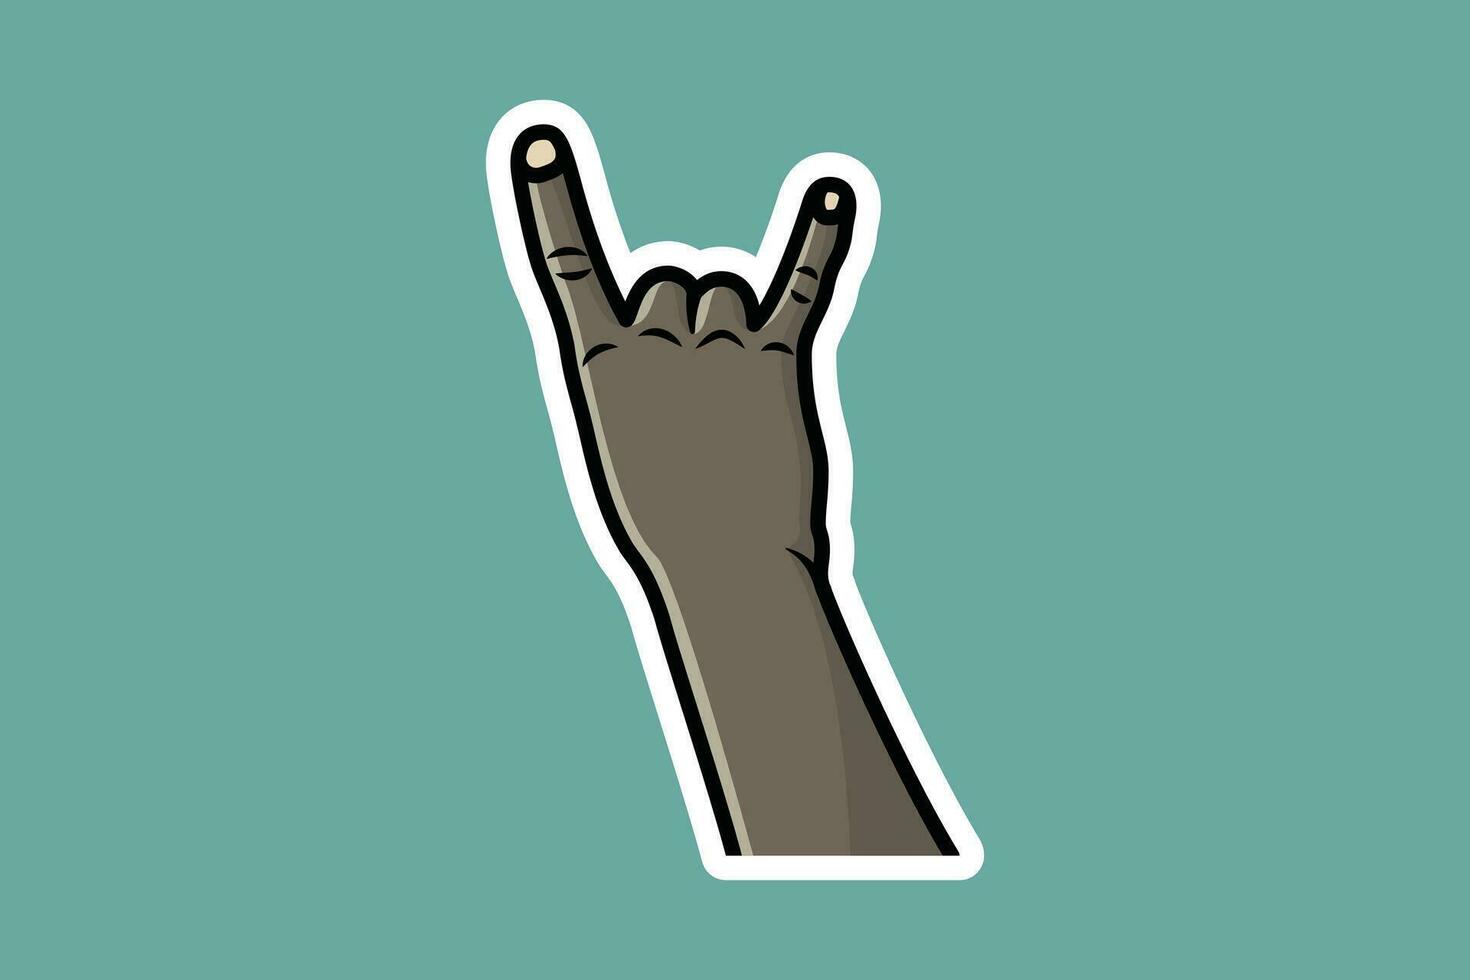 Rock Sign Hand Gesture Sticker vector illustration. People hand objects icon concept. Horns gesture grunge composition sticker vector design.